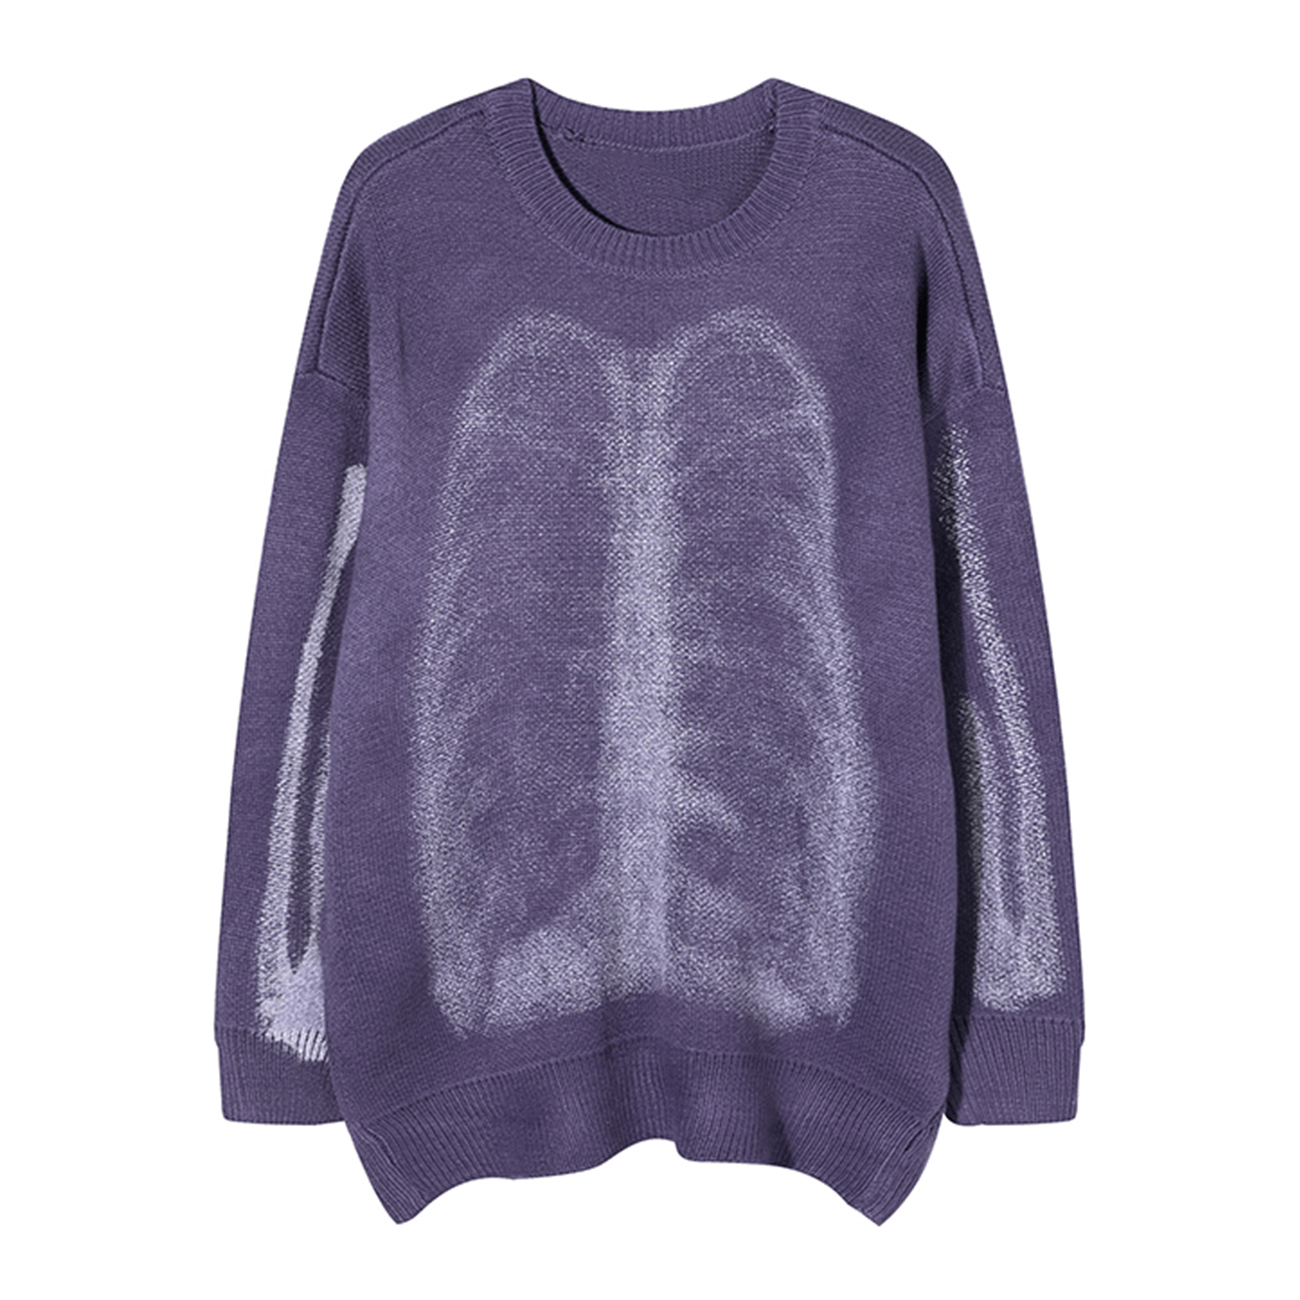 Gothic Oversize Knit Sweater With Skeleton Print / Casual Thick Loose Pullover - HARD'N'HEAVY